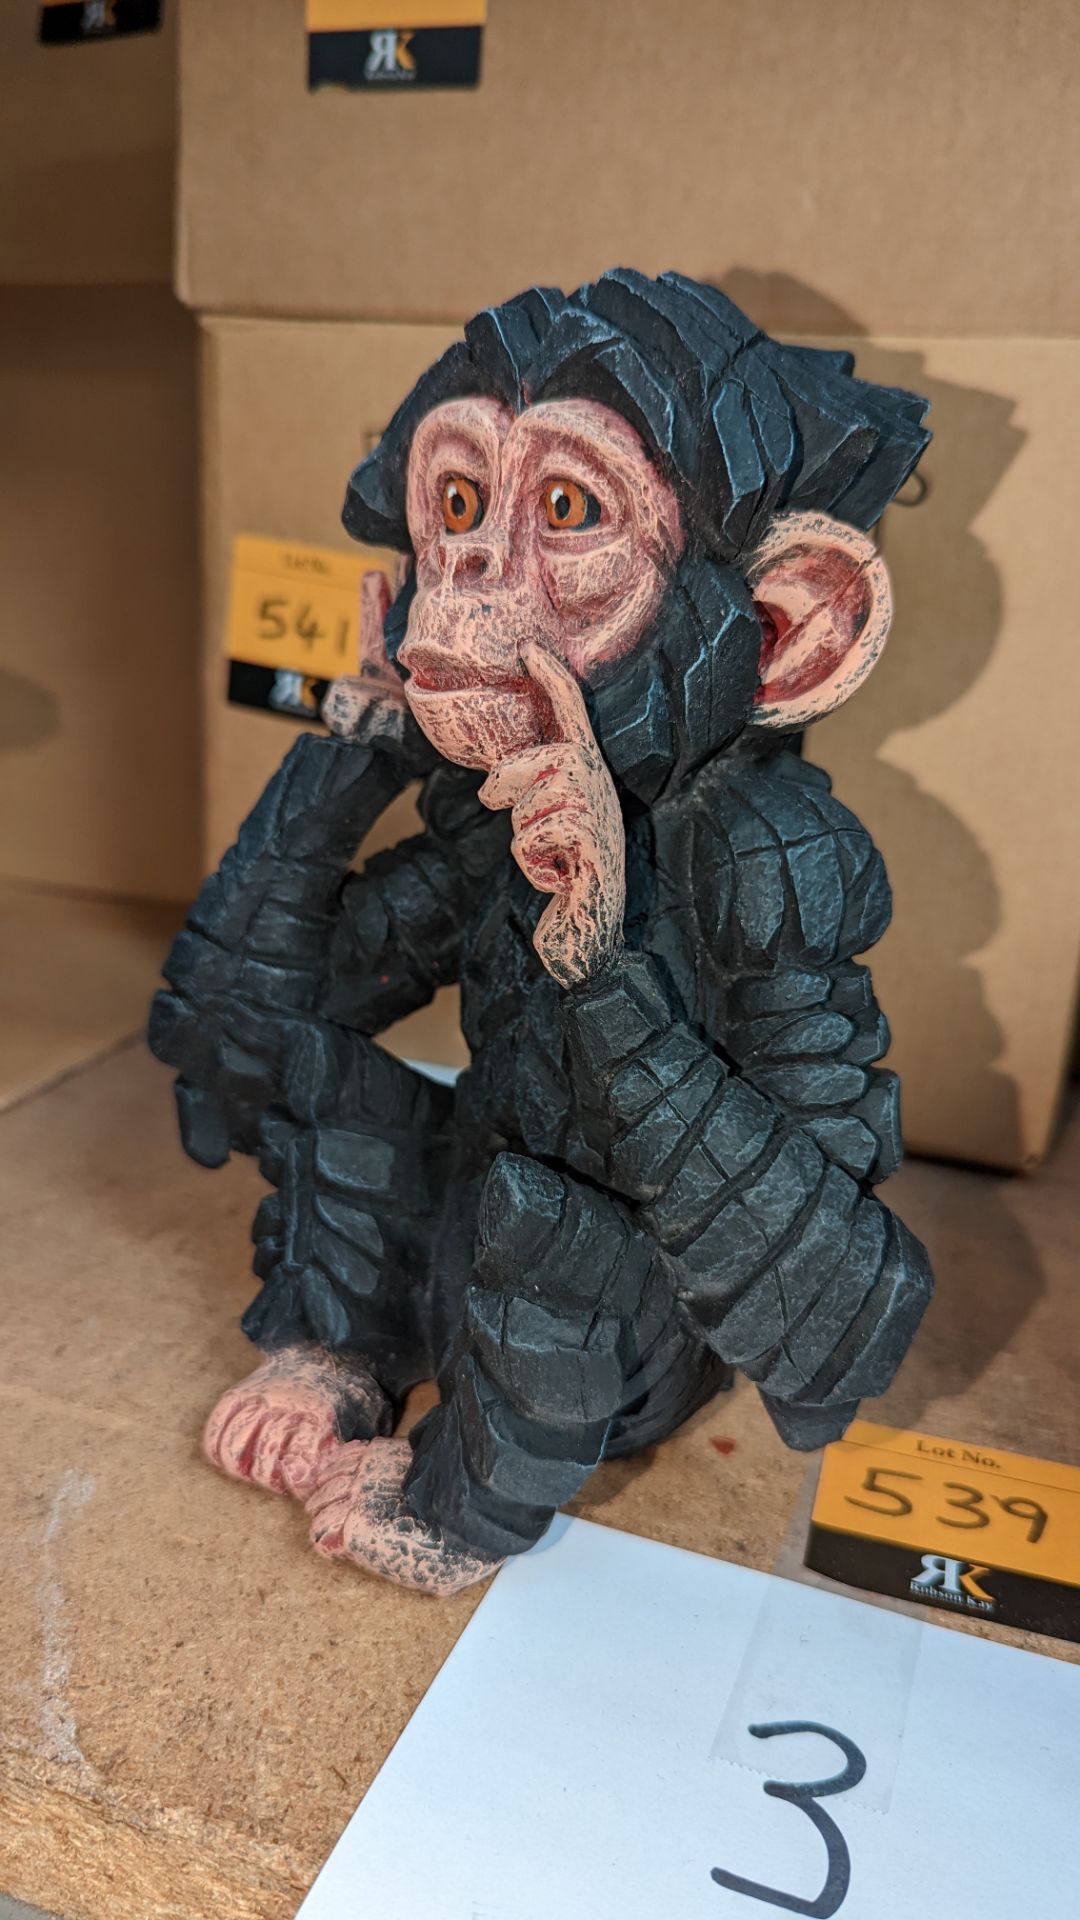 Edge Sculpture by Matt Buckley - Baby Chimpanzee bust (Hear no Evil), product code ED41, RRP £120 - Image 6 of 6